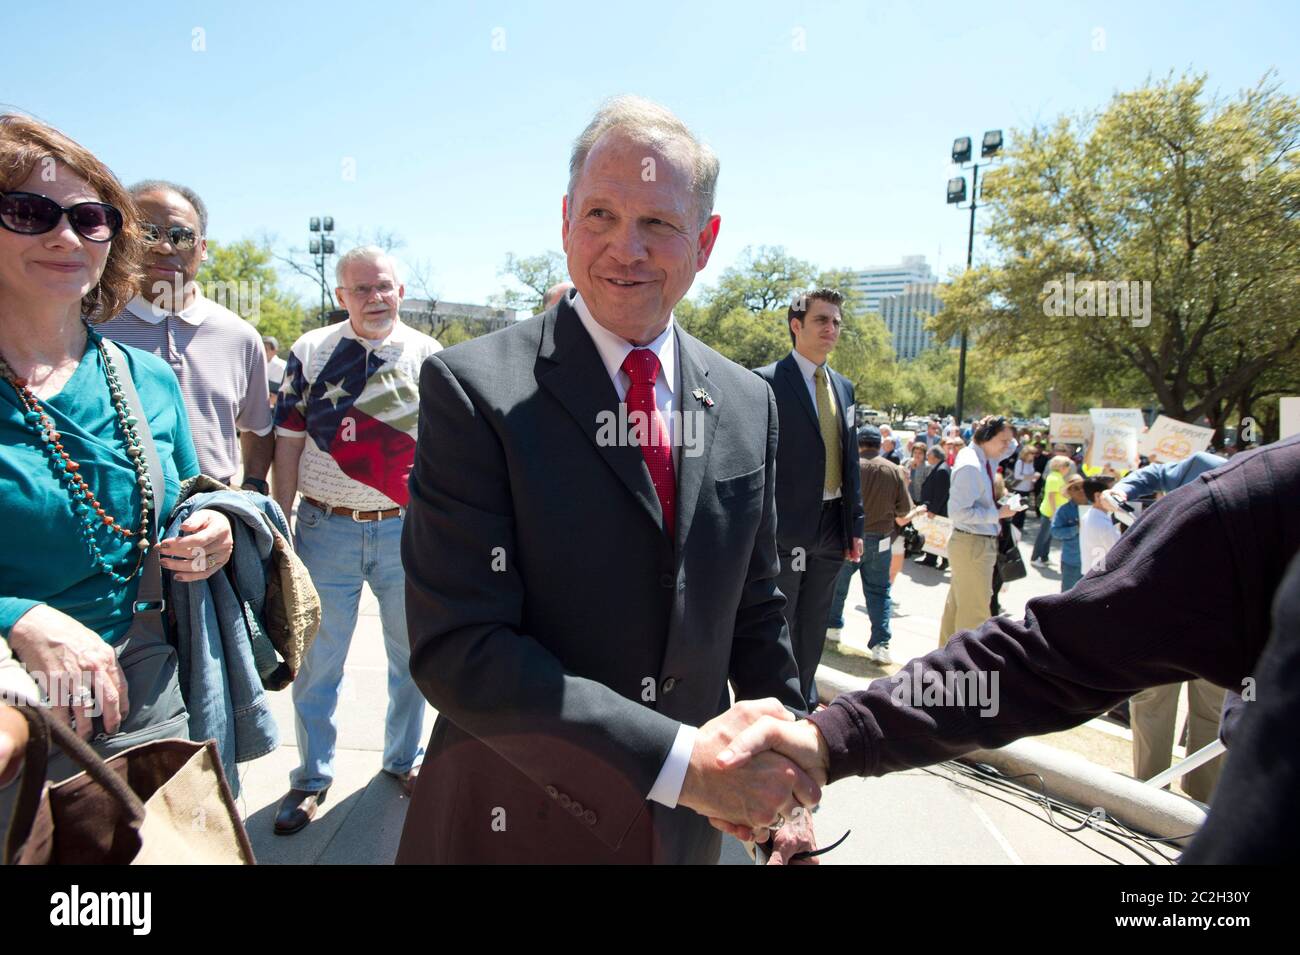 Austin Texas USA, March 24 2015: Controversial Alabama Supreme Court Chief Justice Roy Moore shakes hands after speaking alongside conservative Texas legislators opposing gay marriage at a Texas Capitol rally.  Moore has told Alabama judges to ignore a recent federal court ruling allowing gay marriage in the state.   ©Bob Daemmrich Stock Photo